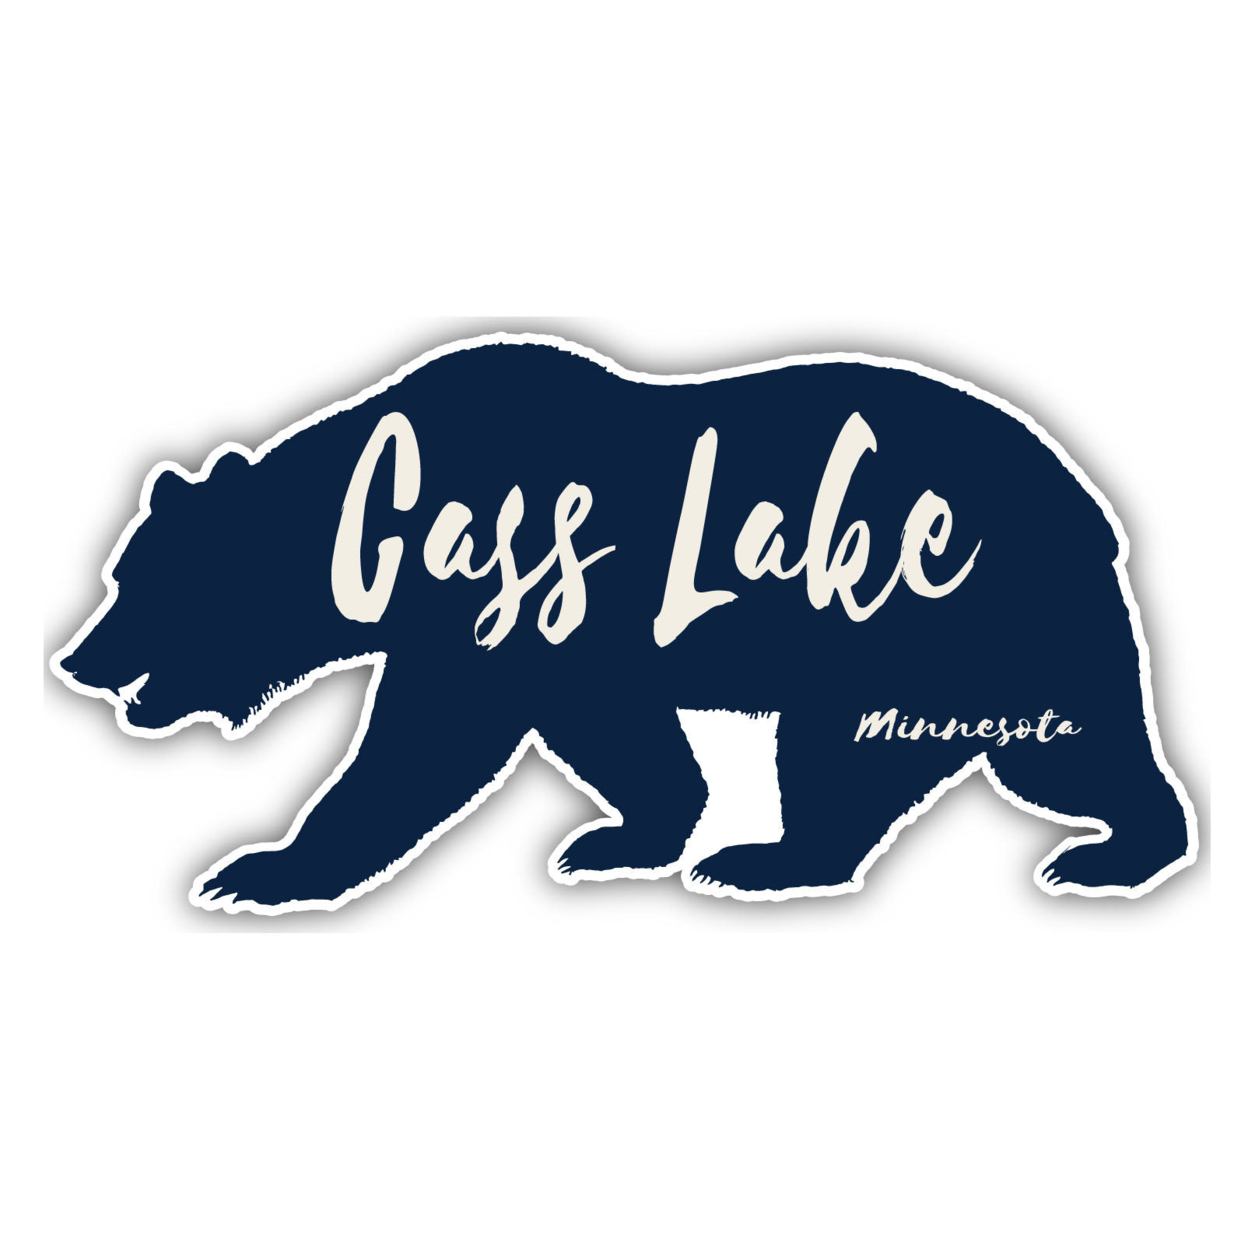 Cass Lake Minnesota Souvenir Decorative Stickers (Choose Theme And Size) - 4-Pack, 8-Inch, Camp Life